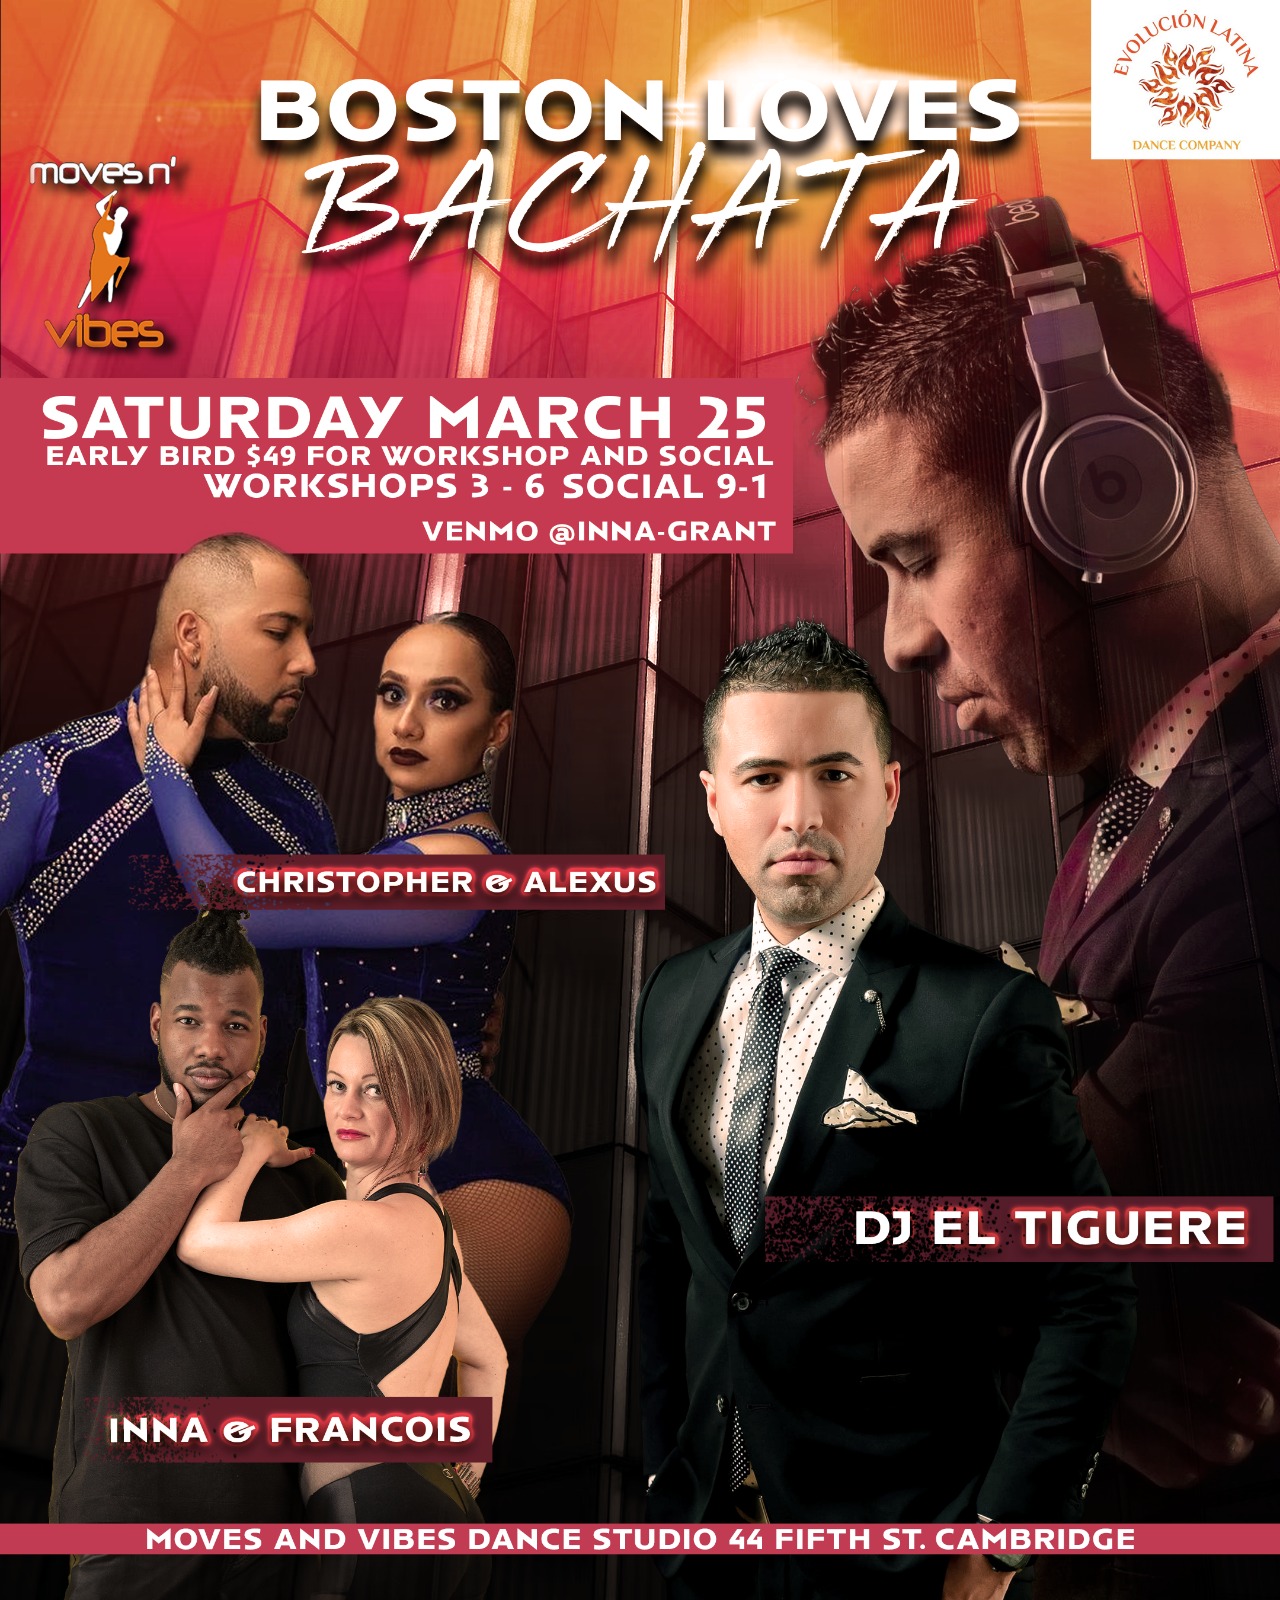 Boston Loves Bachata Poster with event information and photos of featured artists.